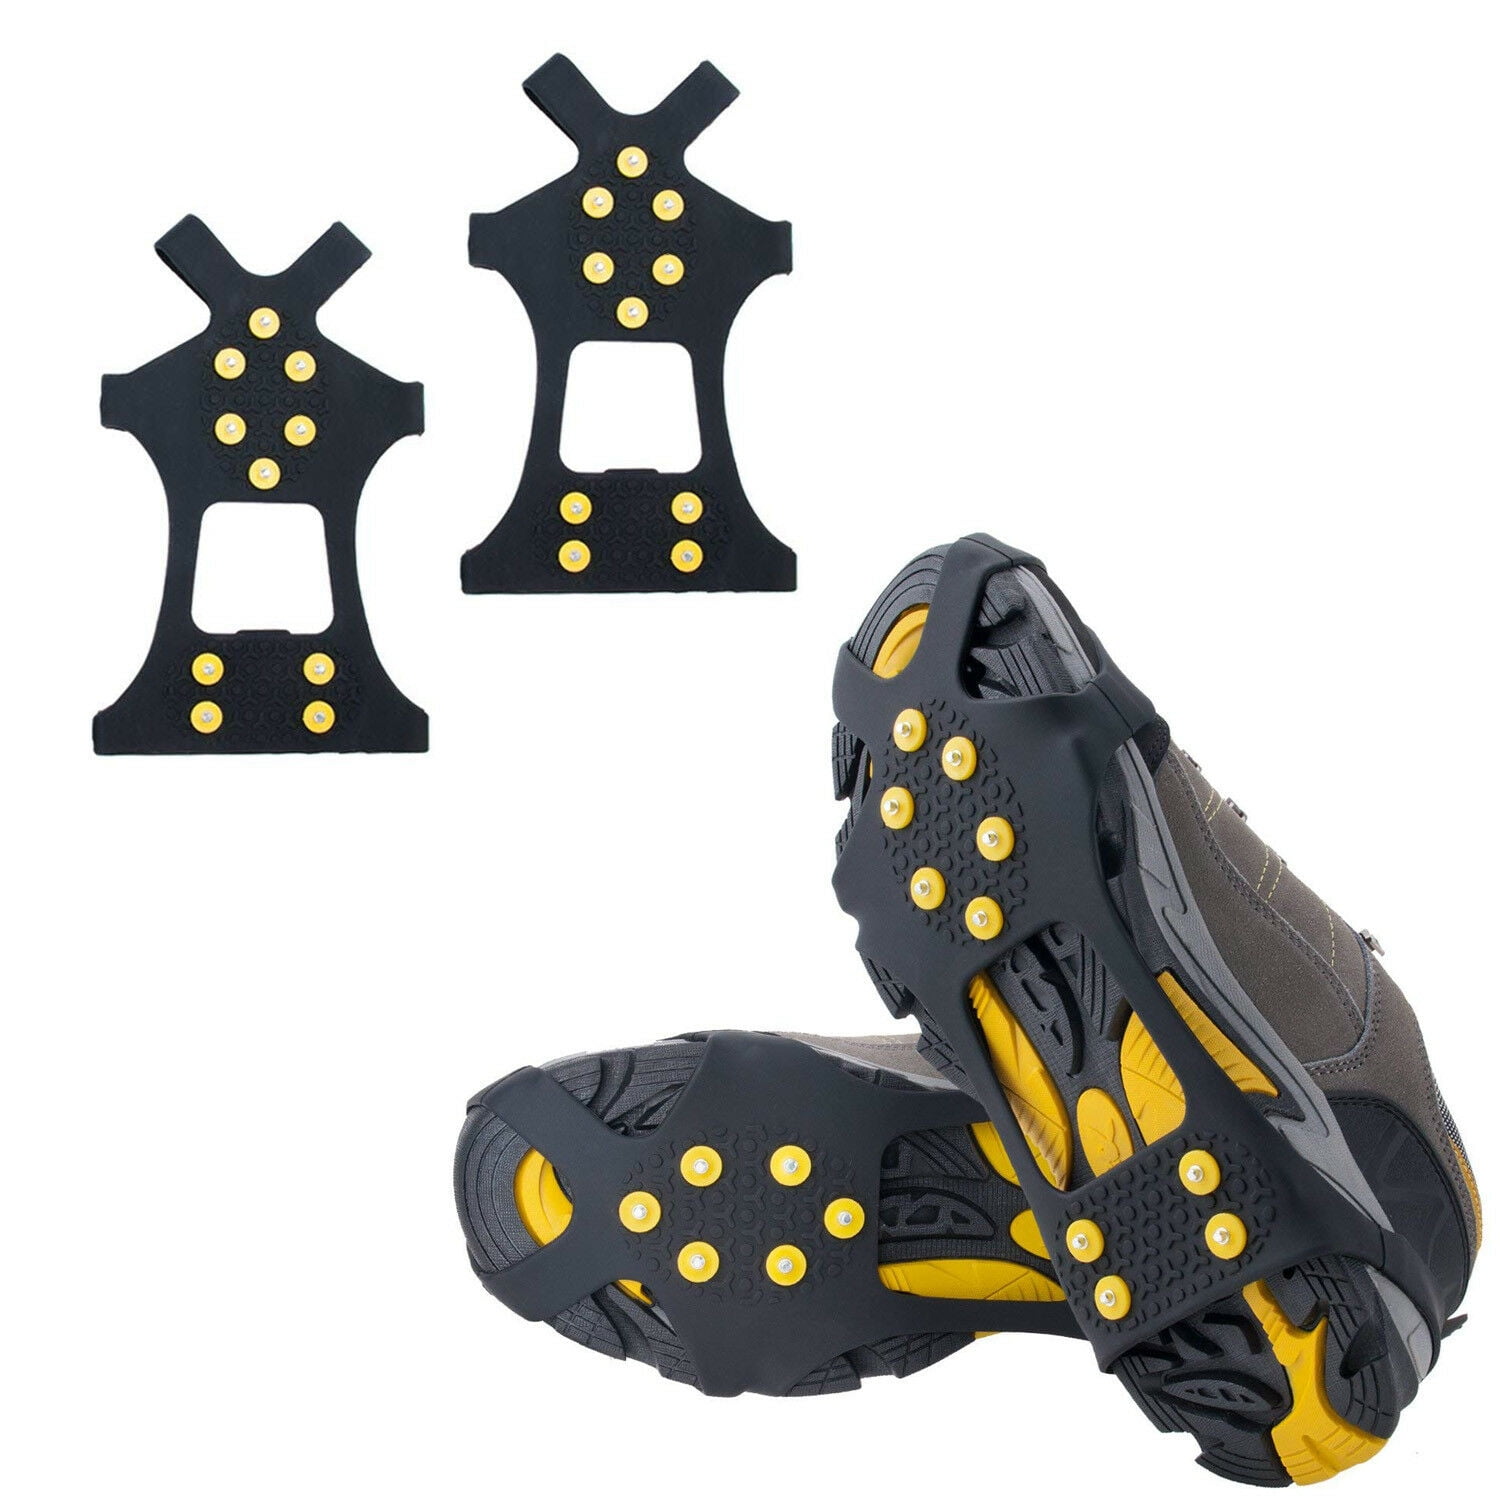 Ice Grippers Anti Slip Universal Snow Spikes Crampons Boot Shoes Grips Cleats 